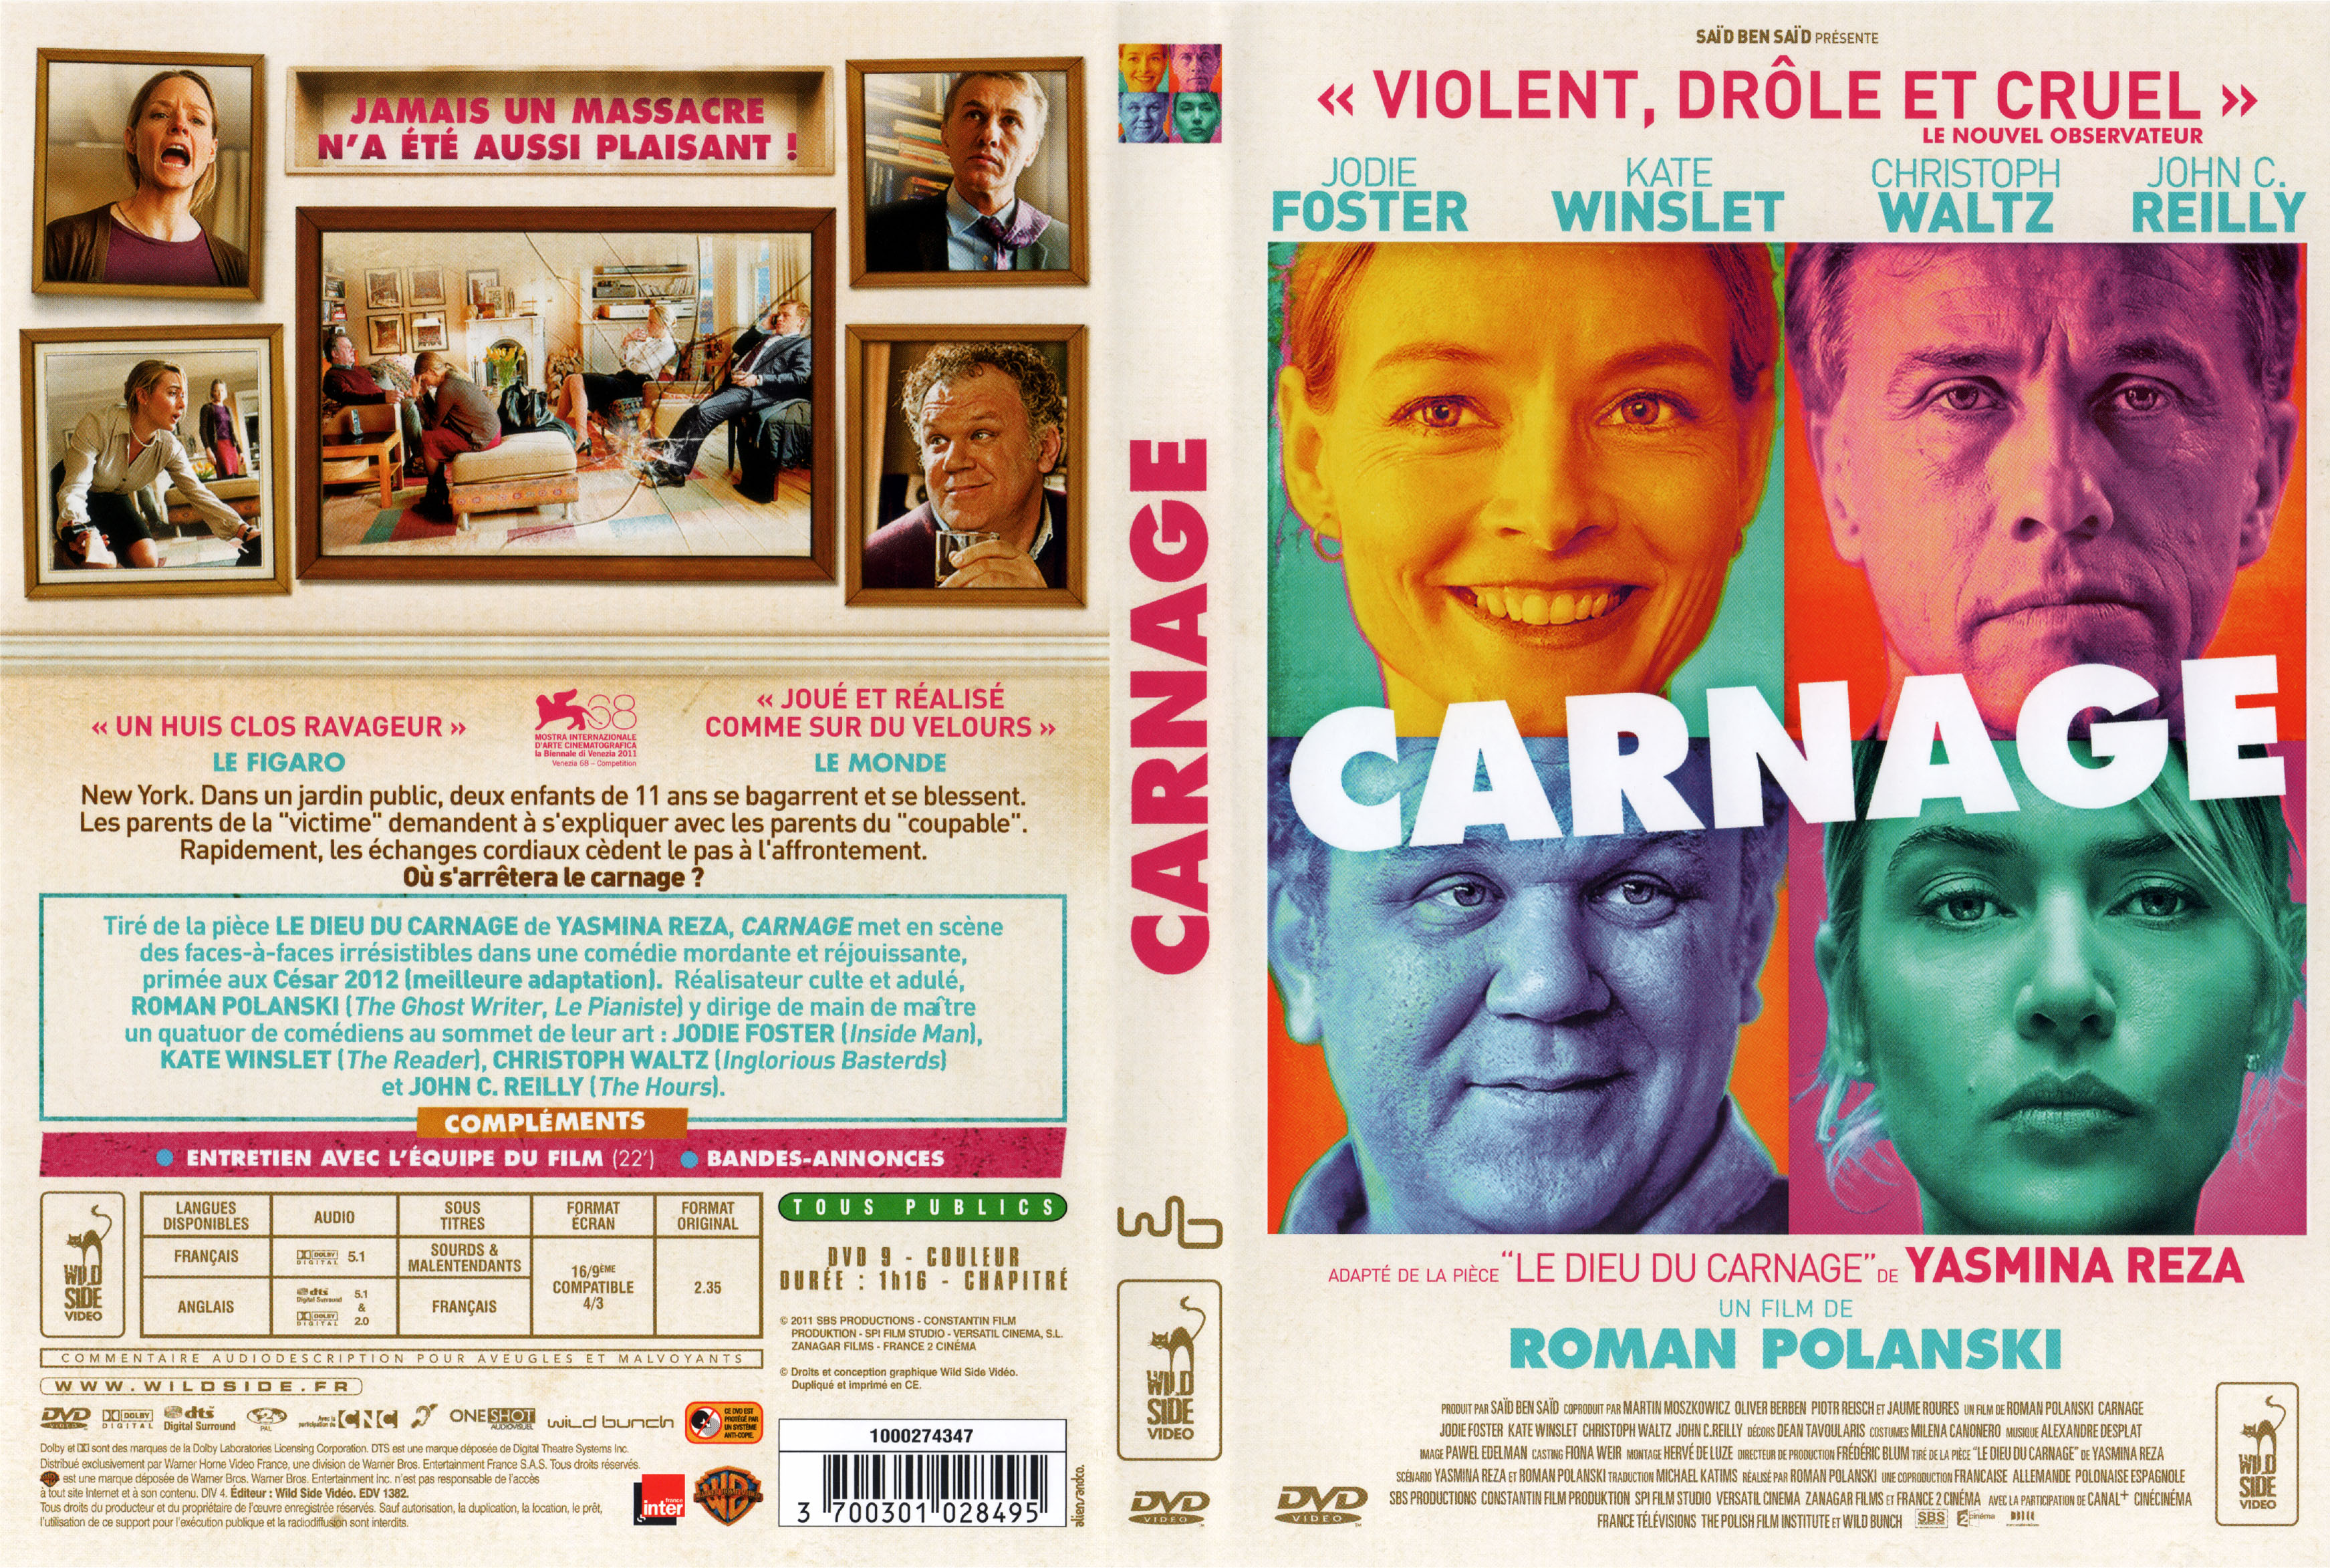 Jaquette DVD Carnage (2011)